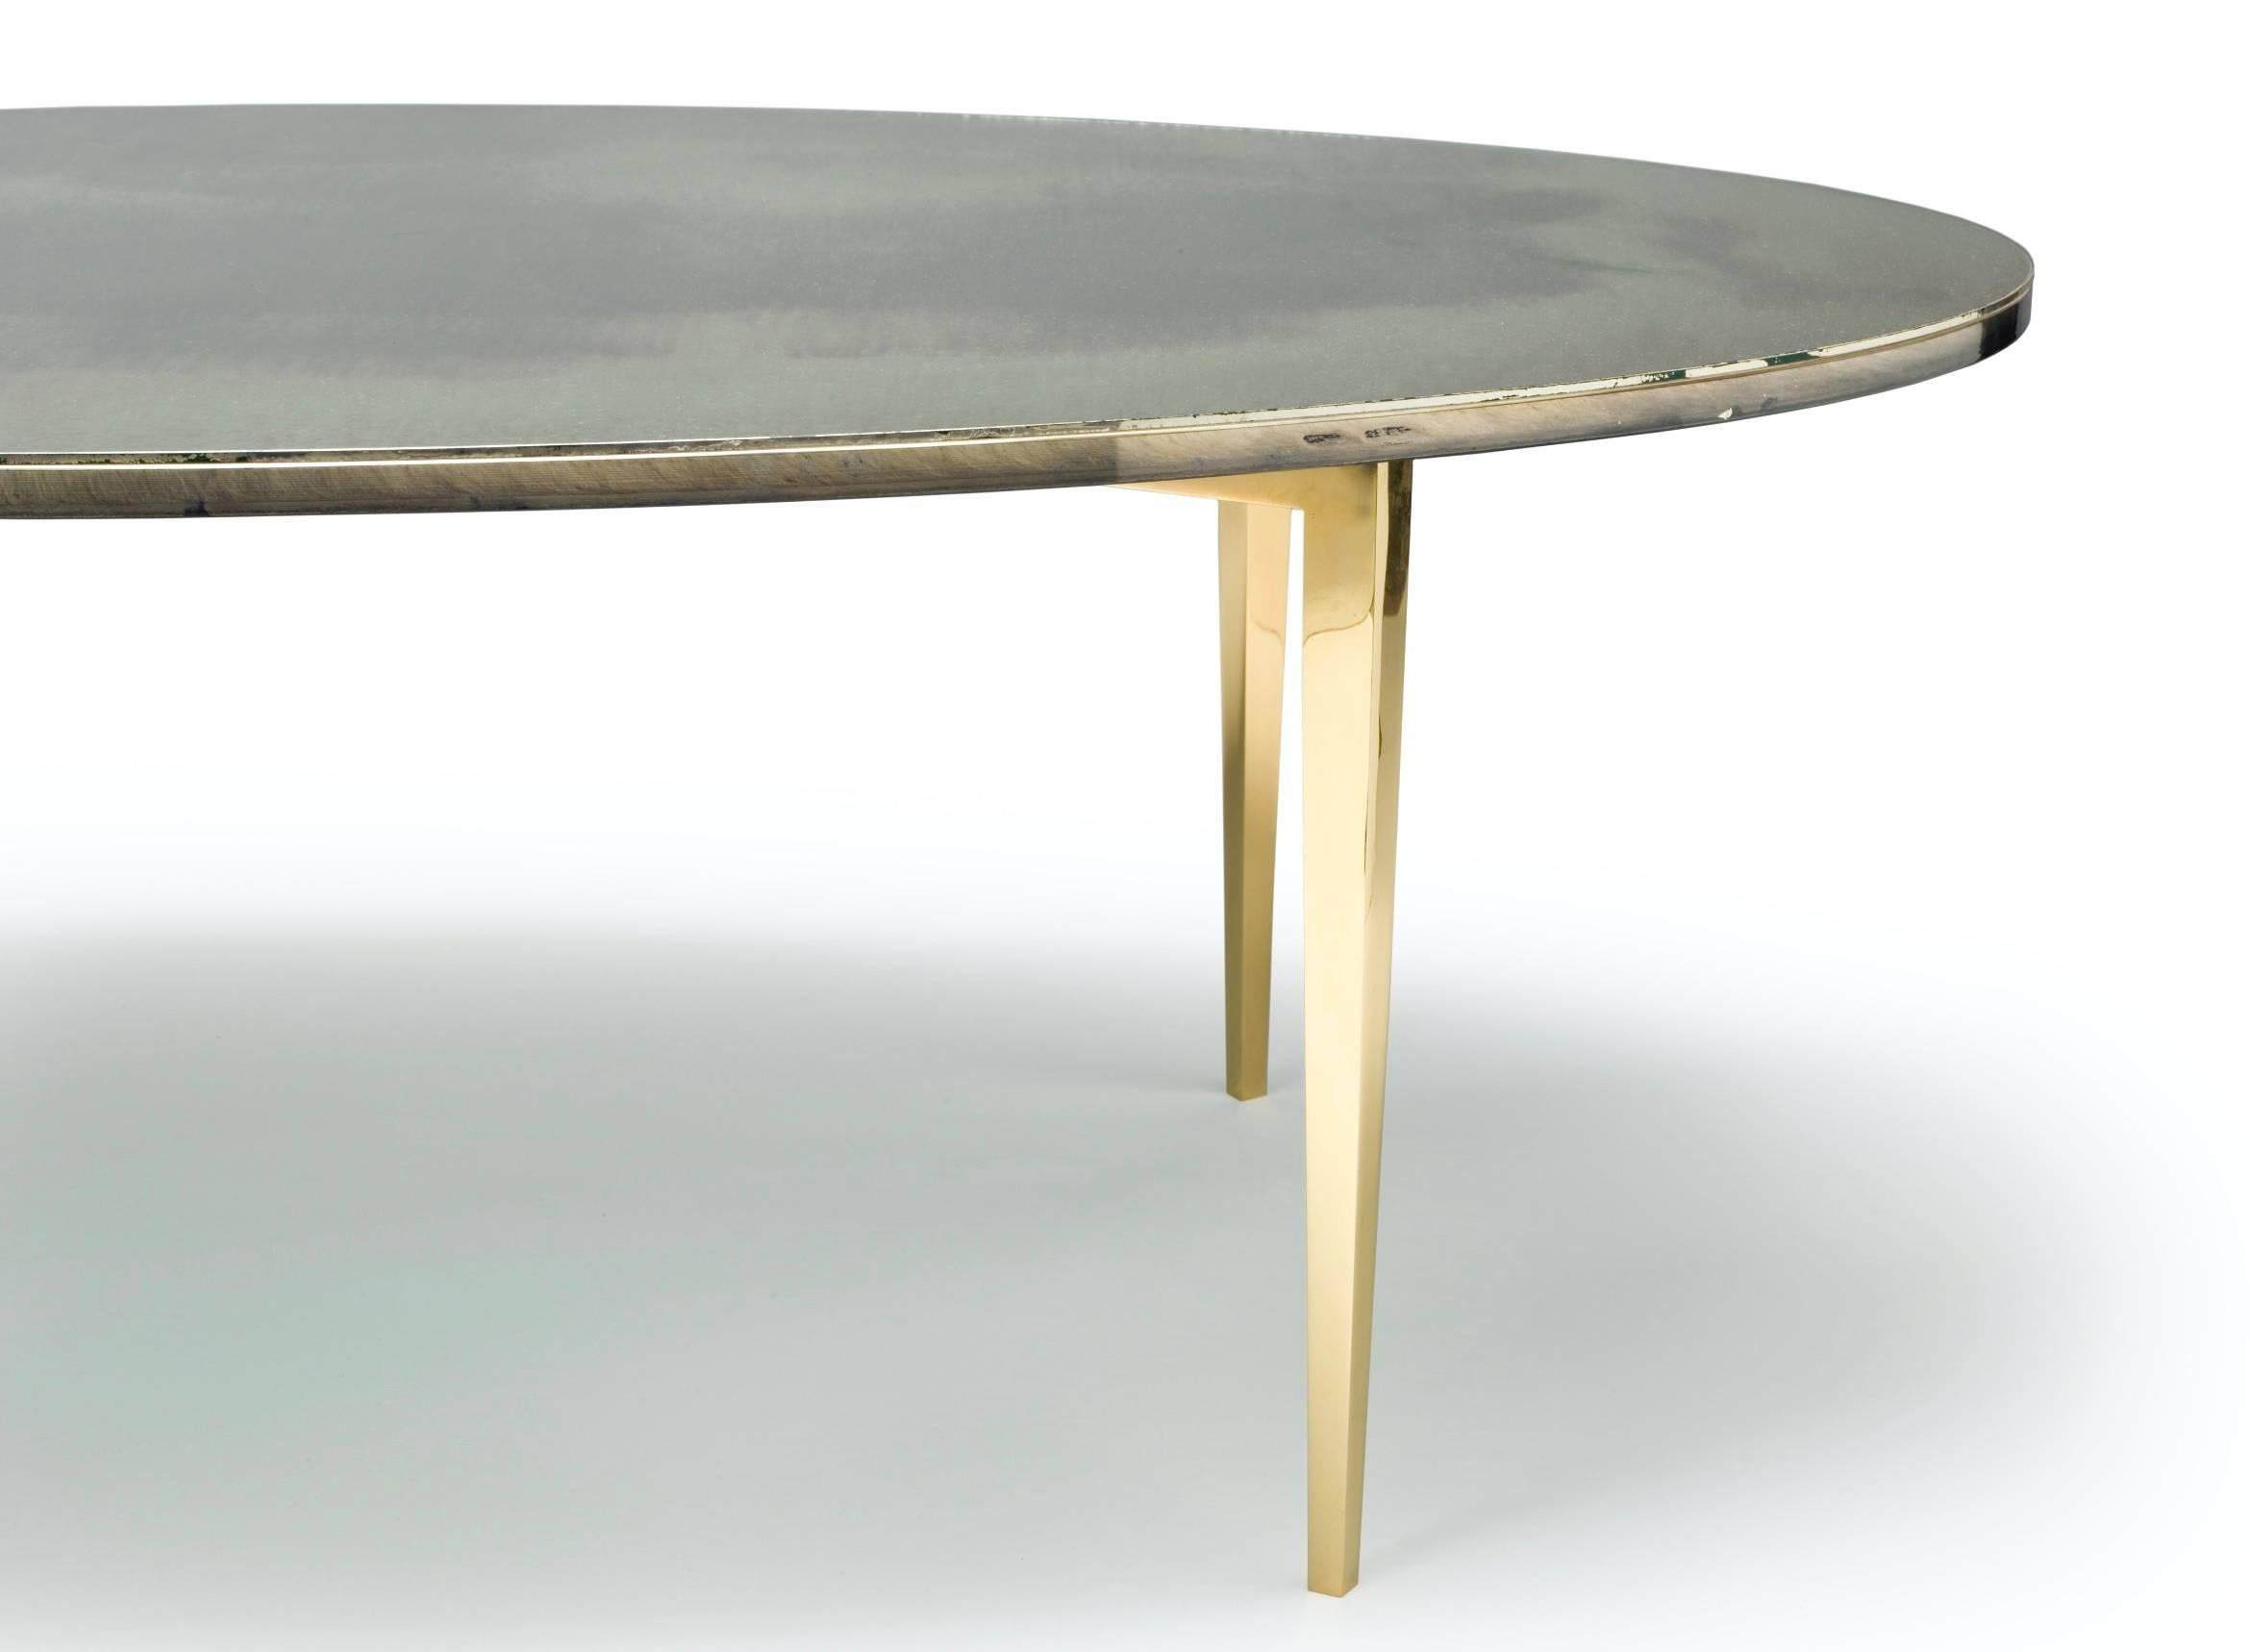 Oval cocktail table on brass base with gold slip and hand-silvered glass top using precious metals, gold, silver, bronze and iron.

Protected with a glass coverslip.